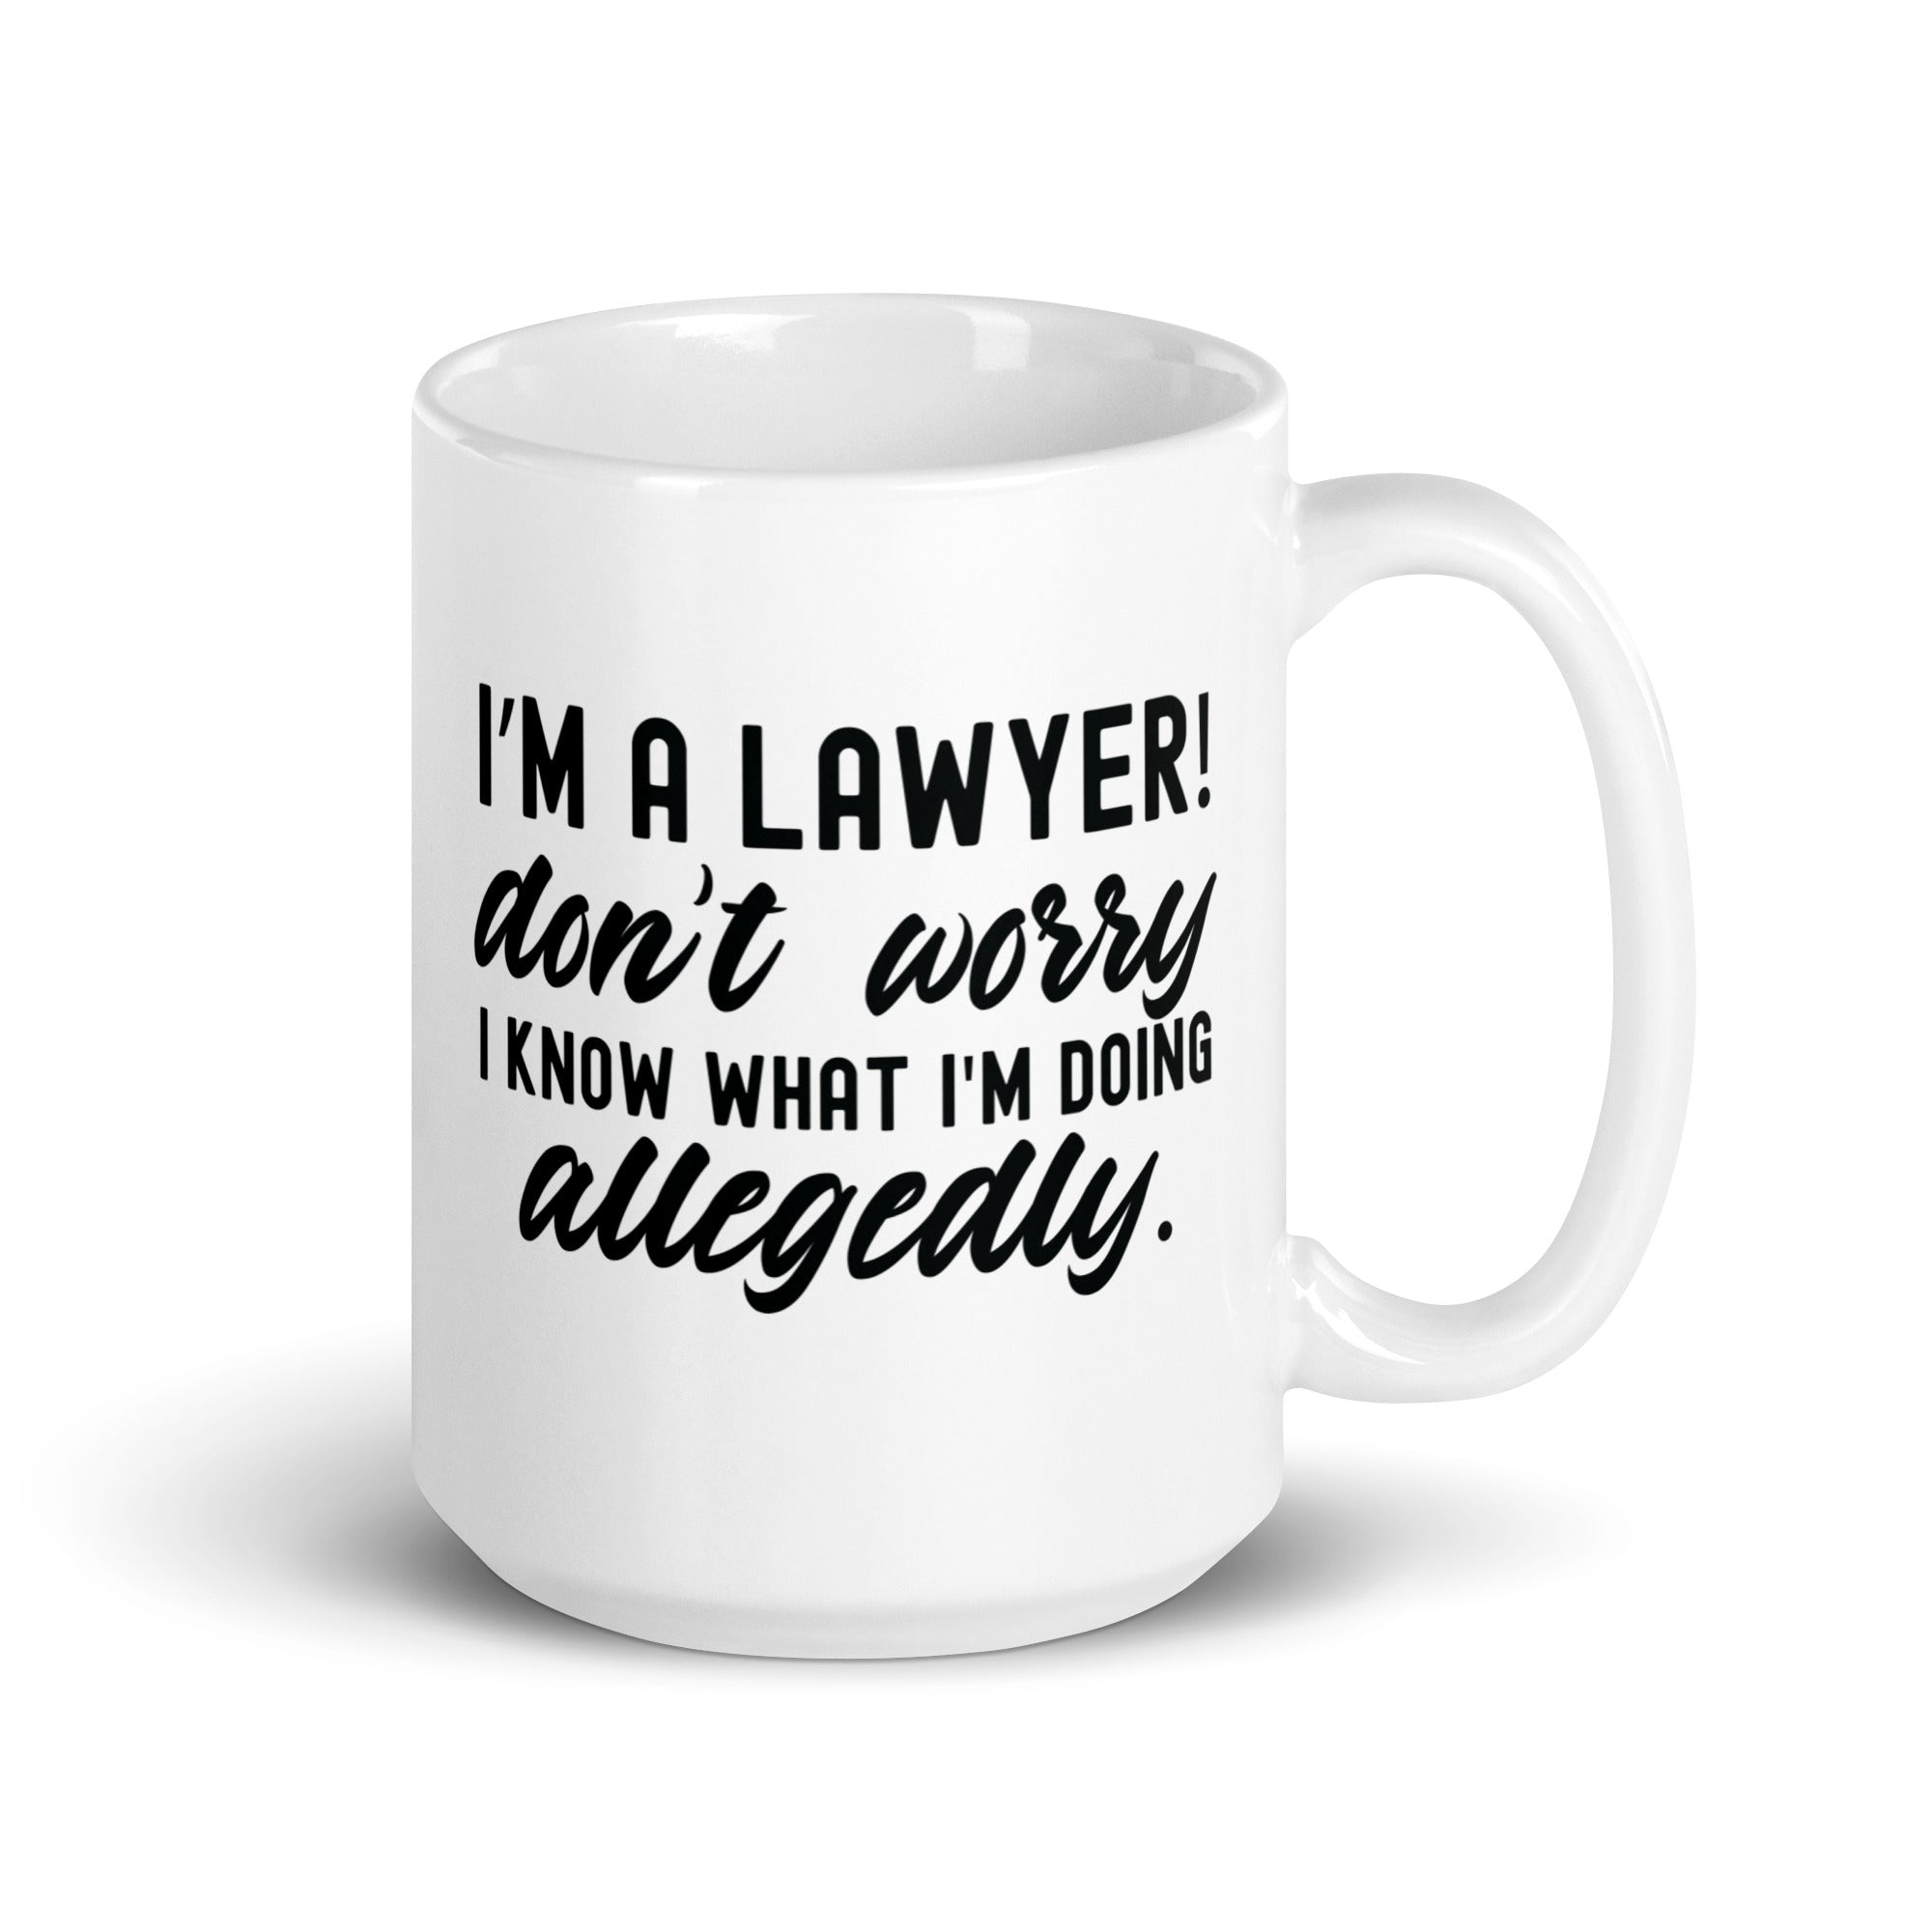 White glossy mug |  I’m a lawyer don’t worry I know what I'm doing (allegedly)